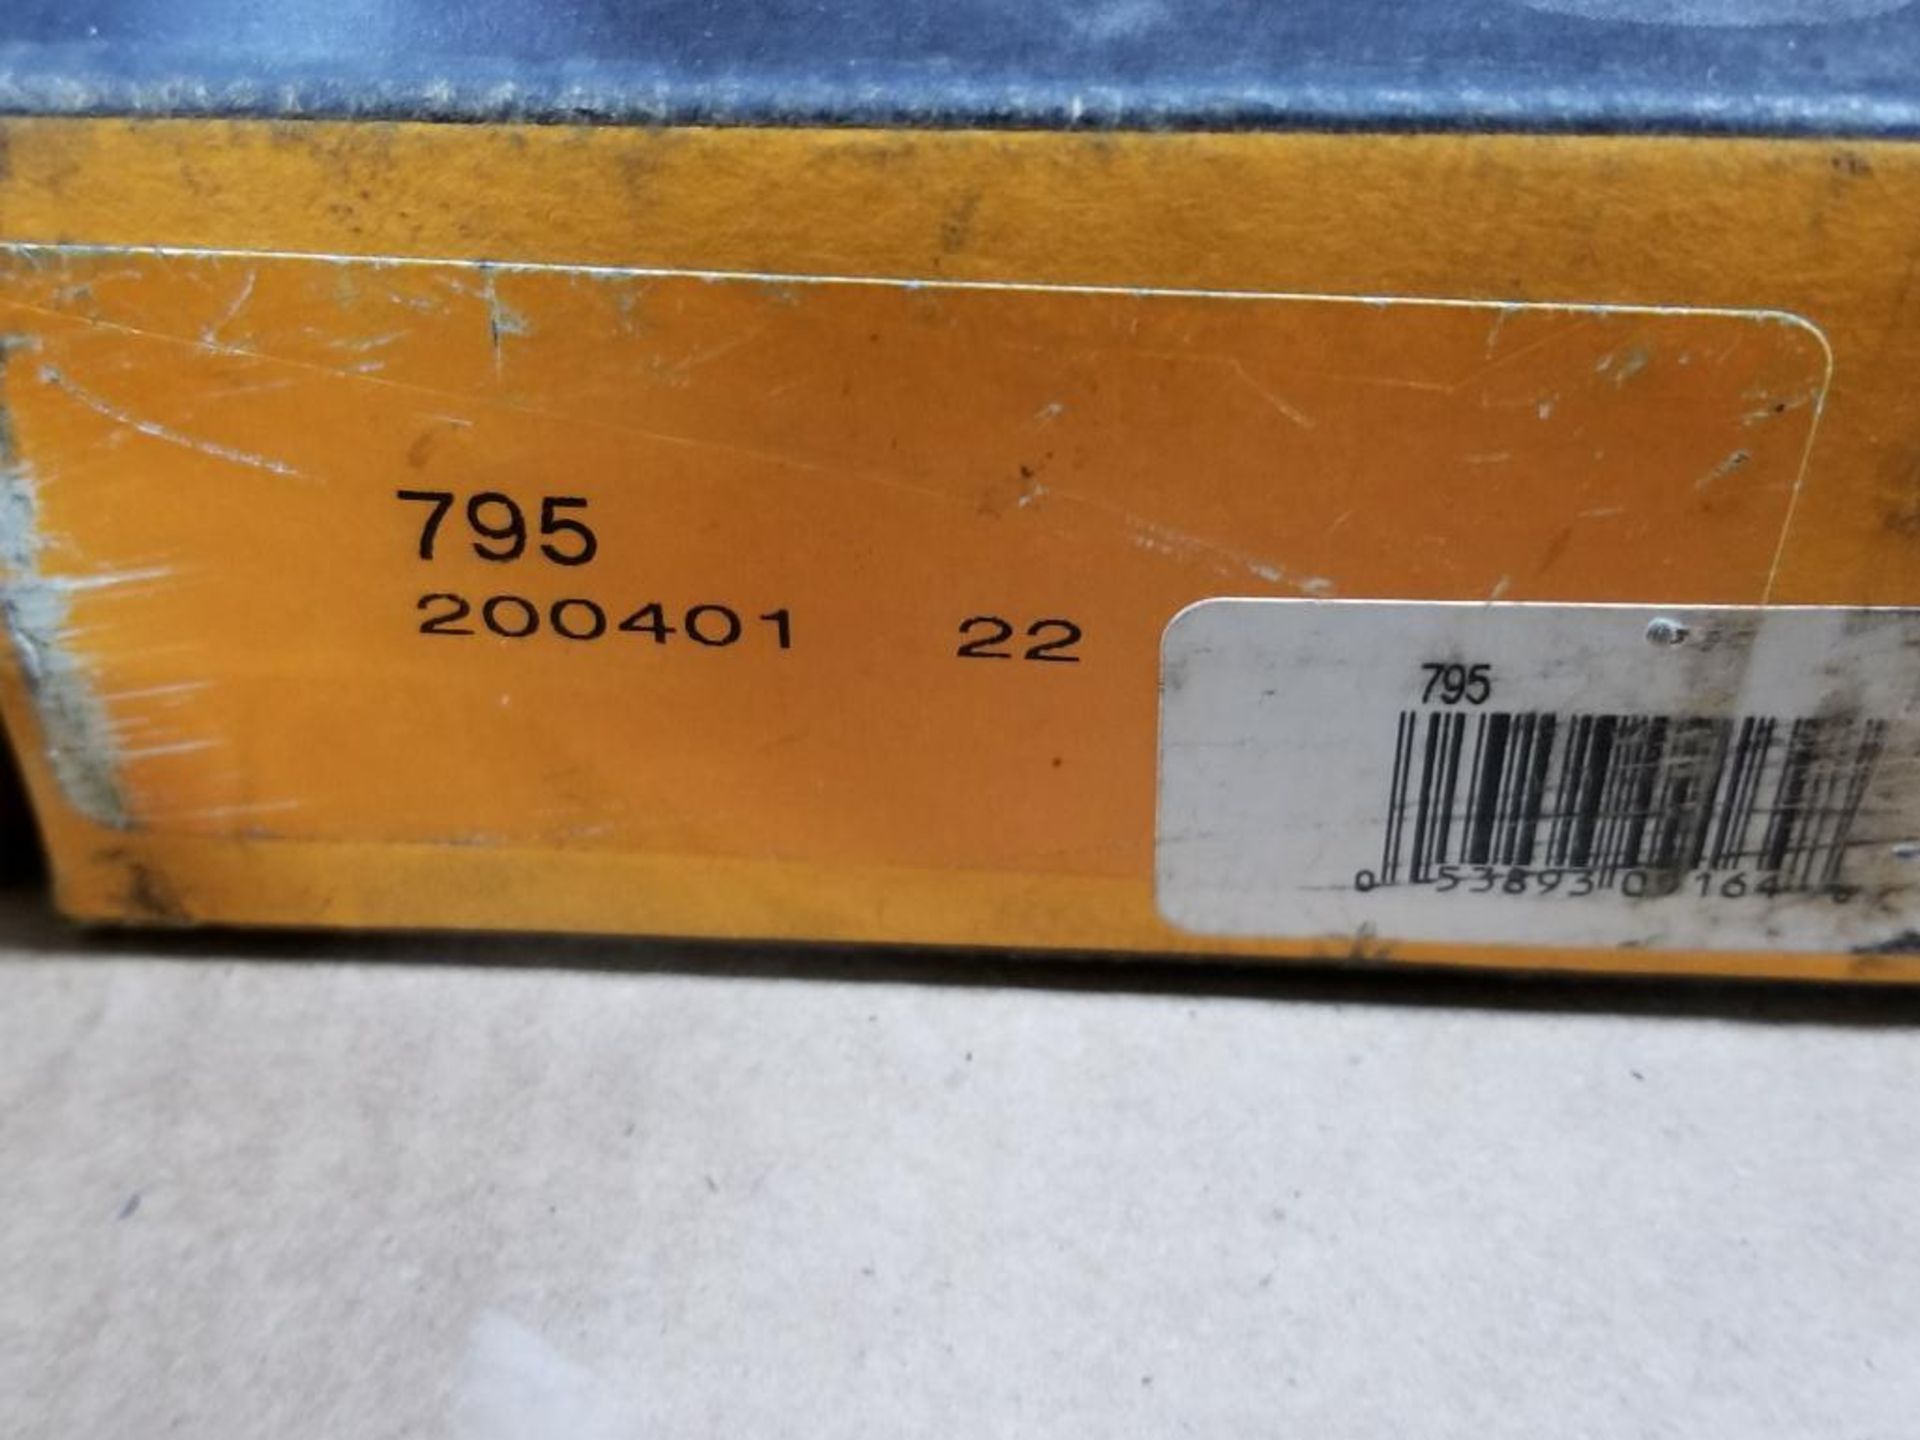 Qty 2 - Timken Bearings. Part number 752D and 795. - Image 3 of 5